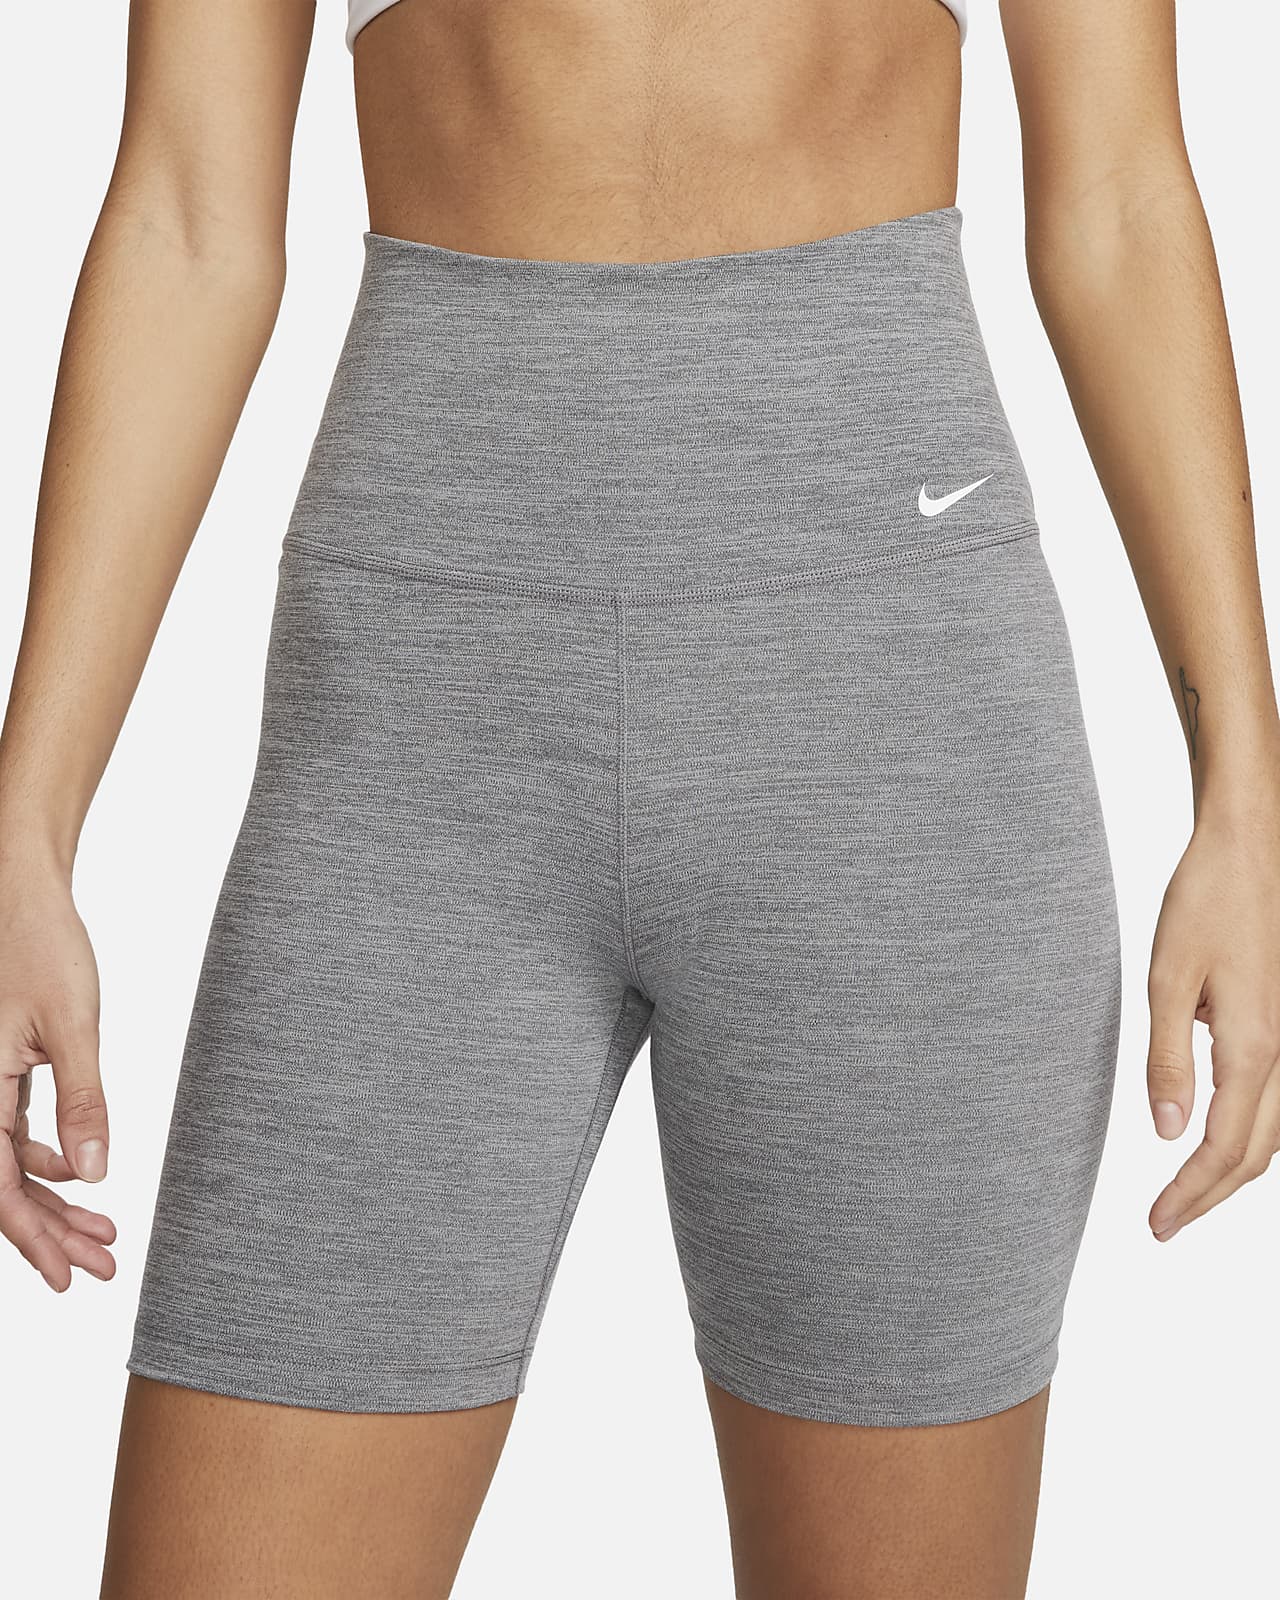 Nike Dri-FIT One Luxe Printed 7 Inch Short Women